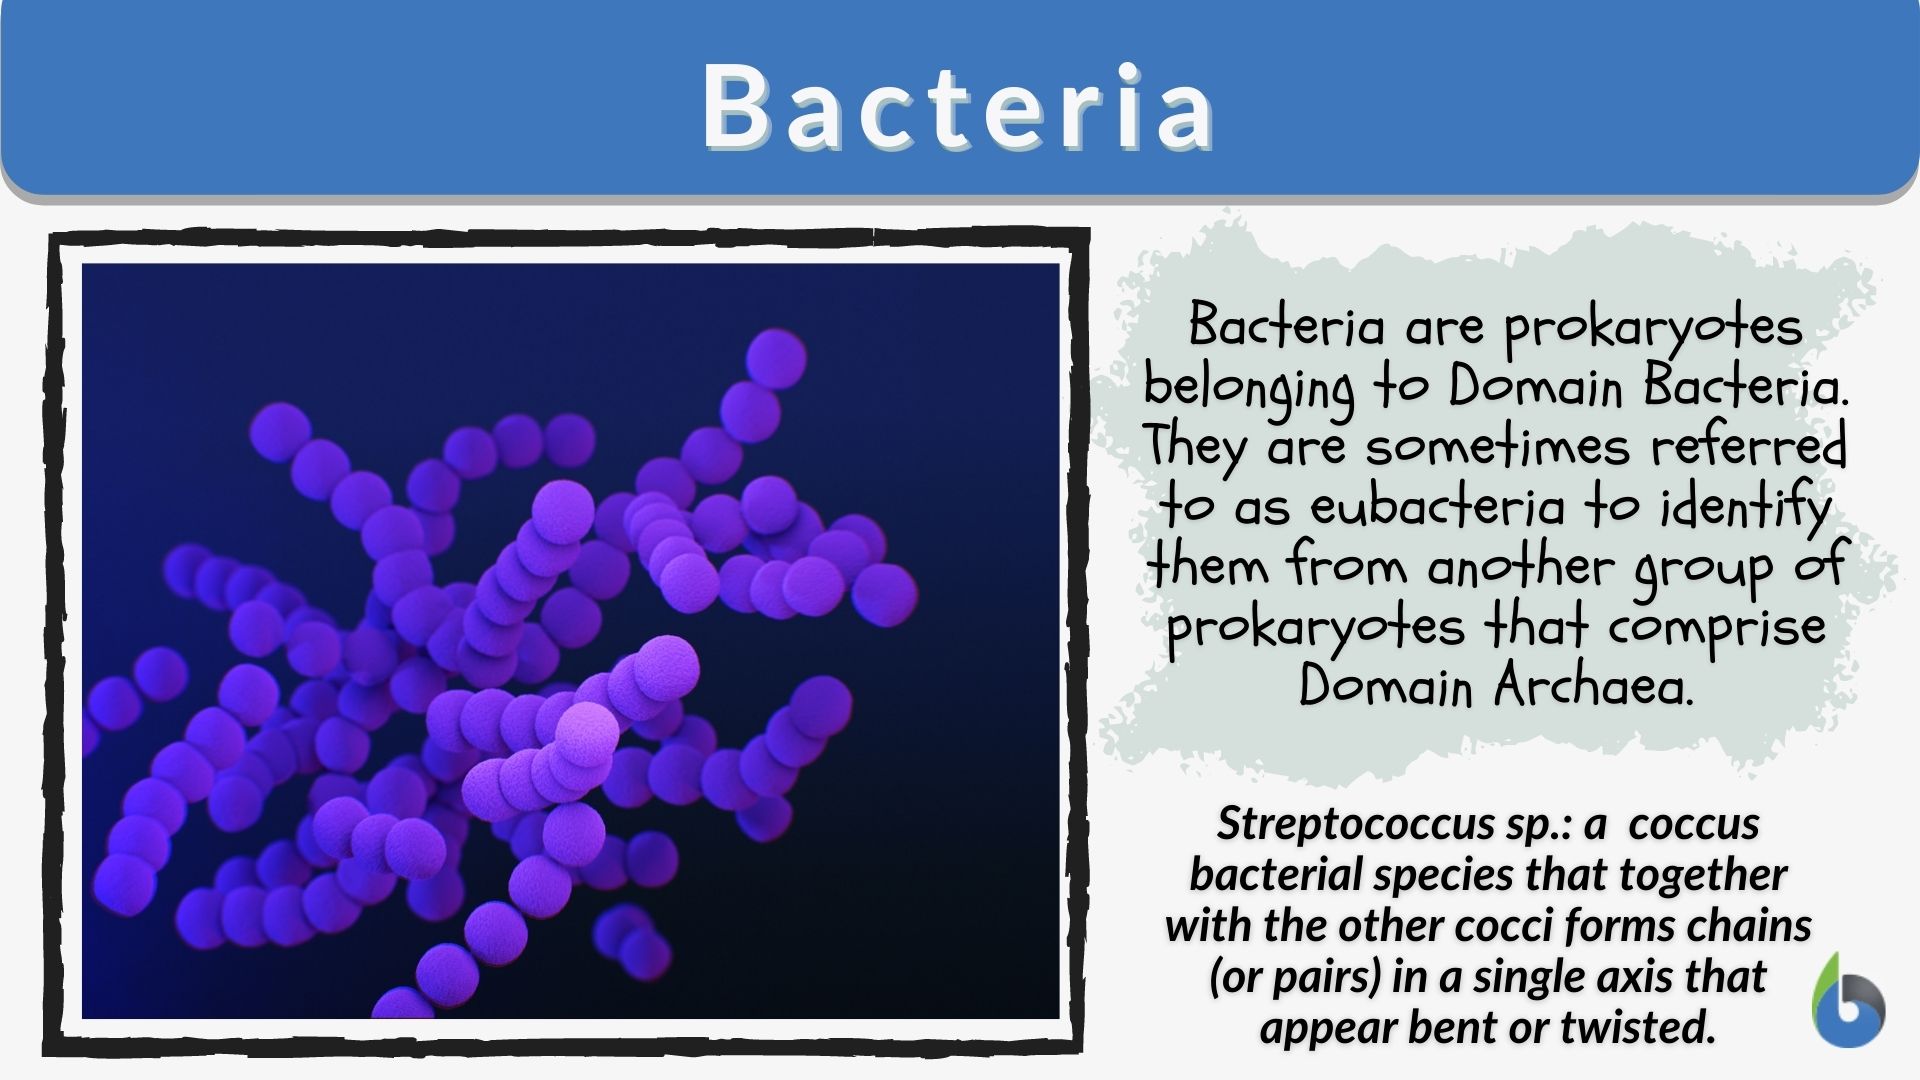 Bacteria - Definition and Examples - Biology Online Dictionary